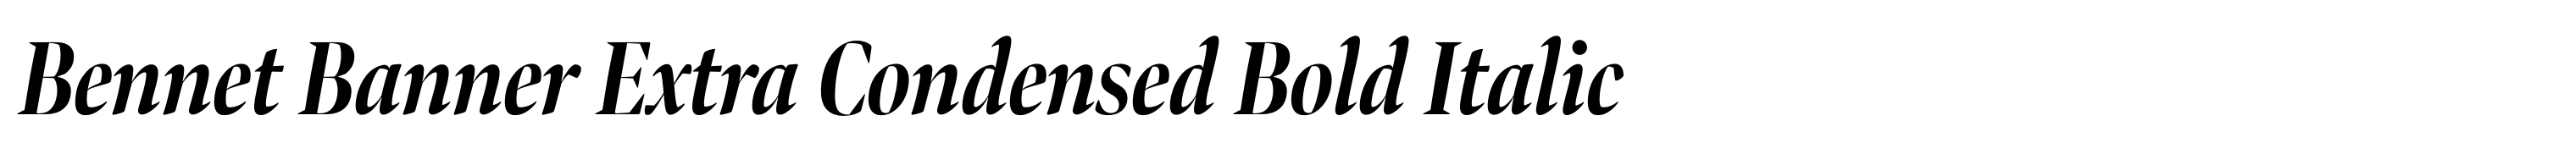 Bennet Banner Extra Condensed Bold Italic